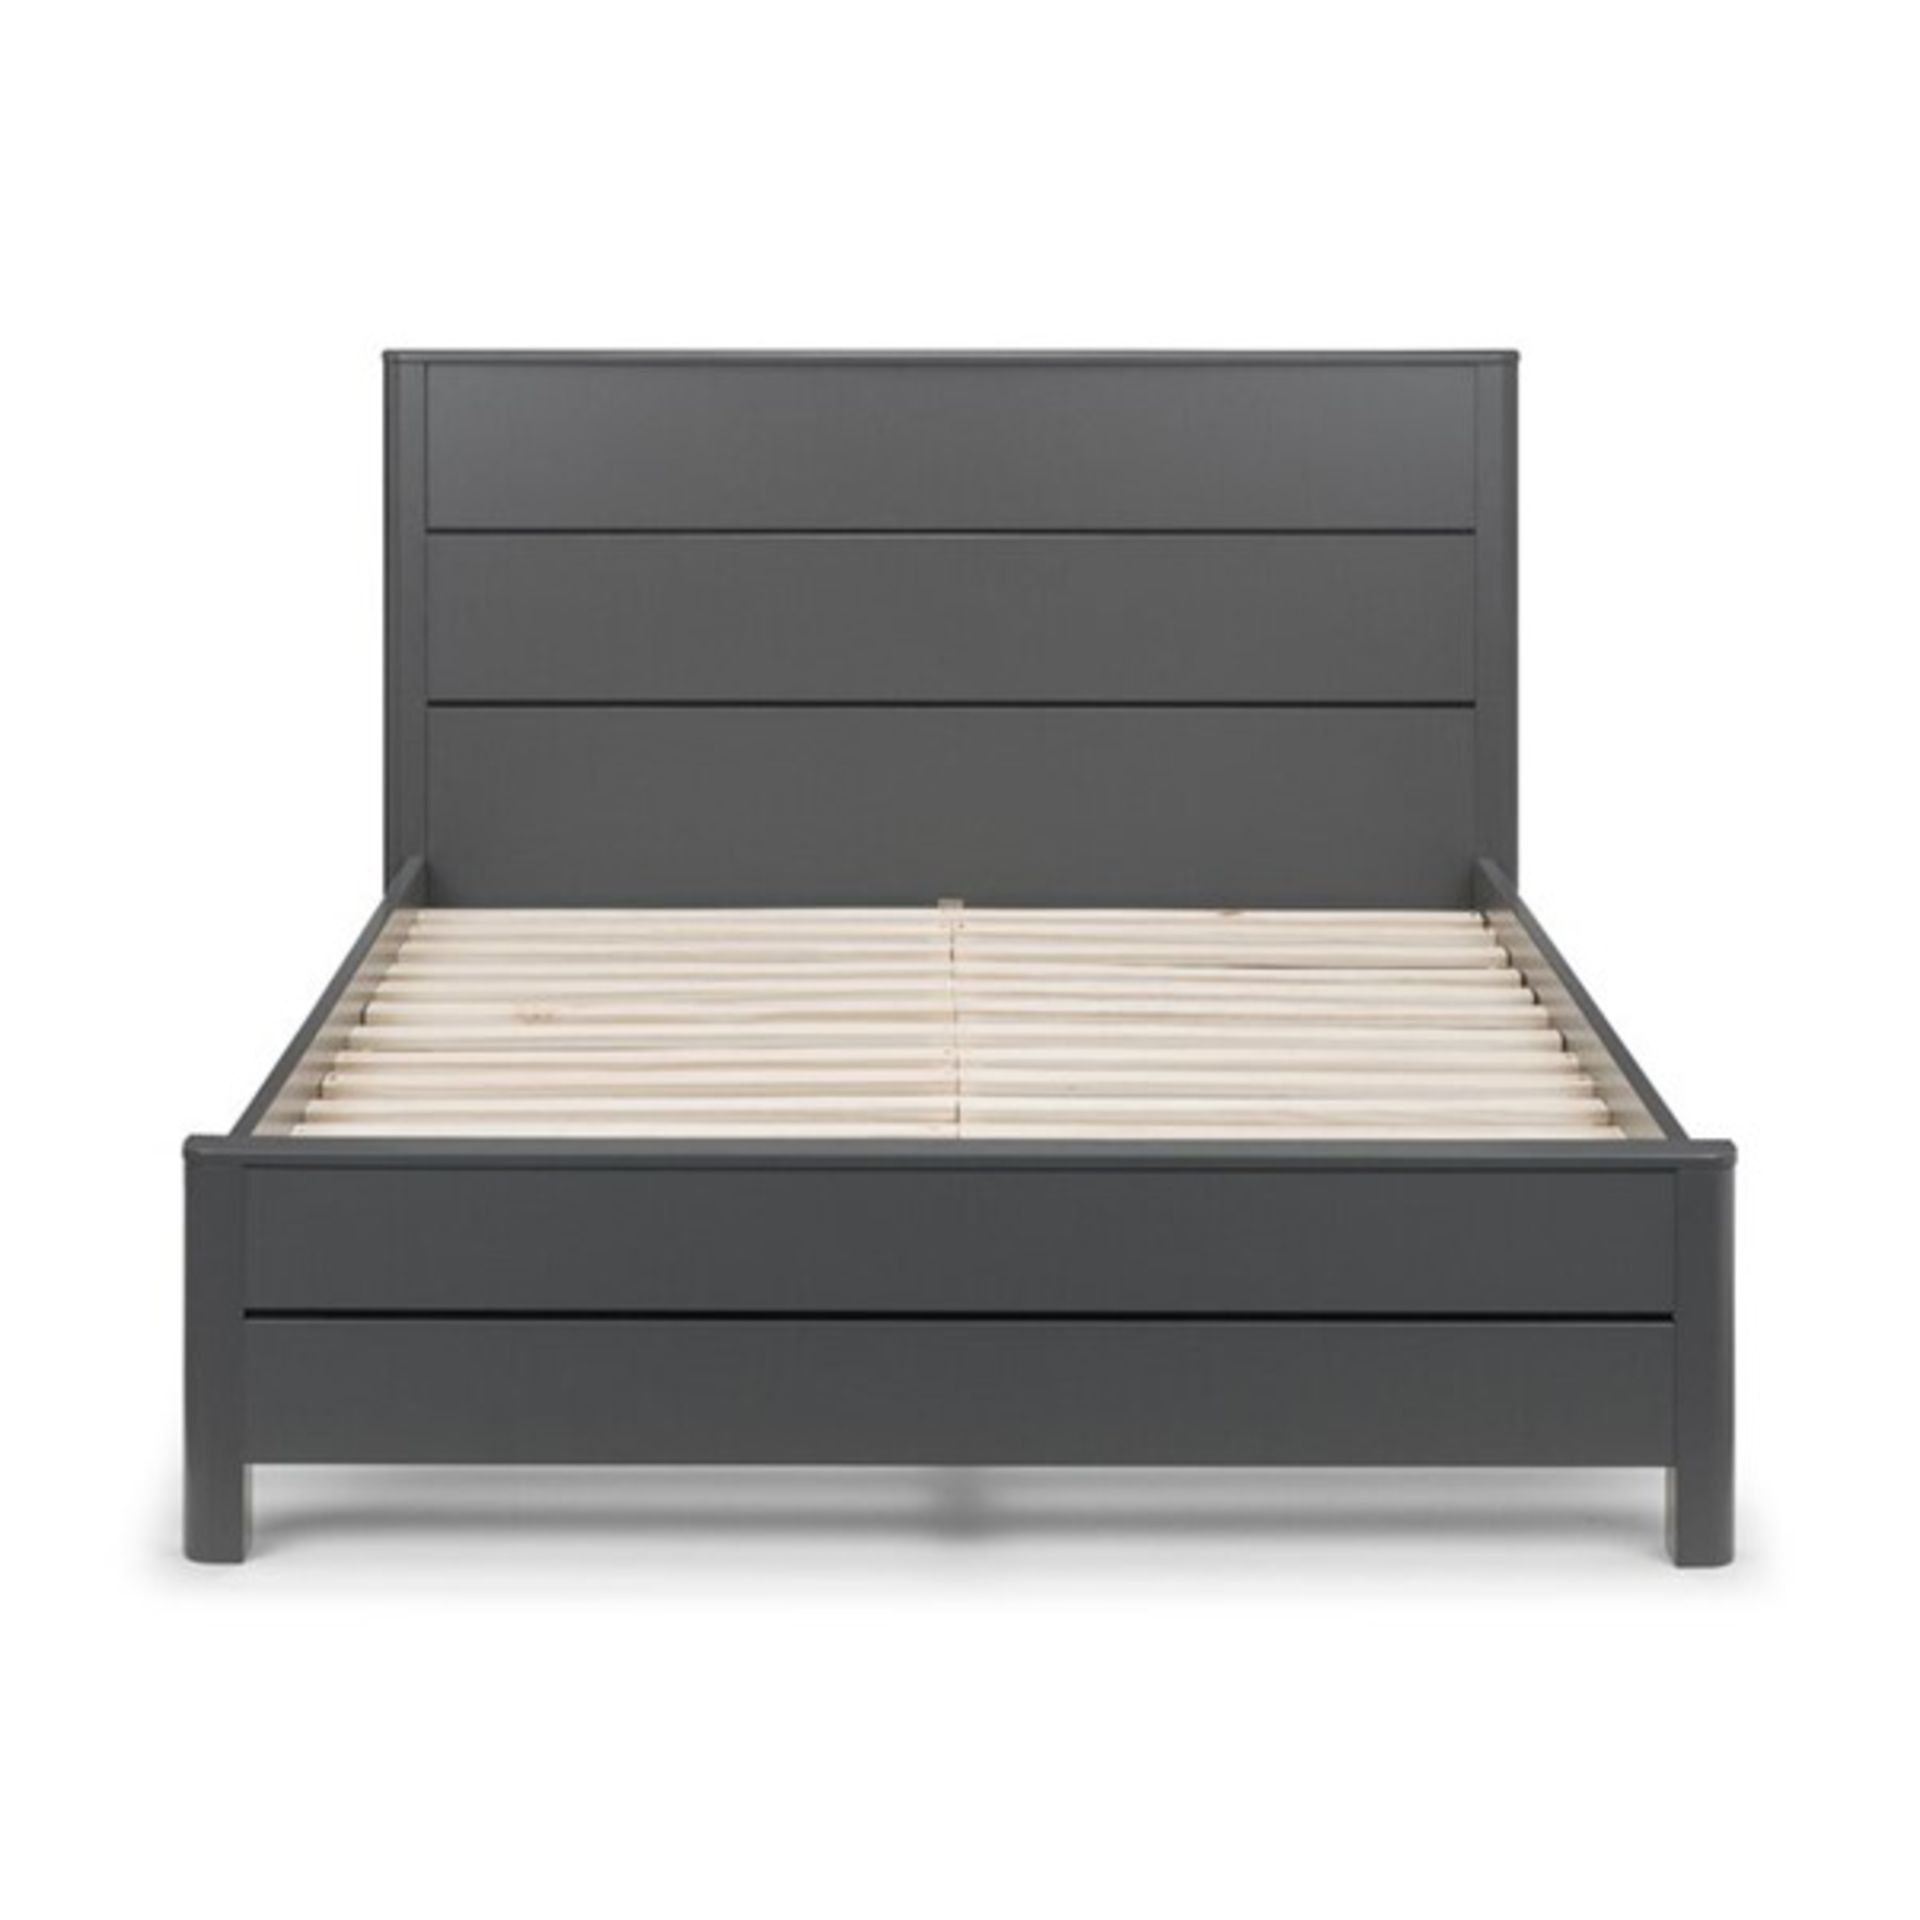 RRP £445.99 - 5FT Kingsize Janine Bed Frame - 165cm W x 214cm L - The bedroom collection has a - Image 2 of 3